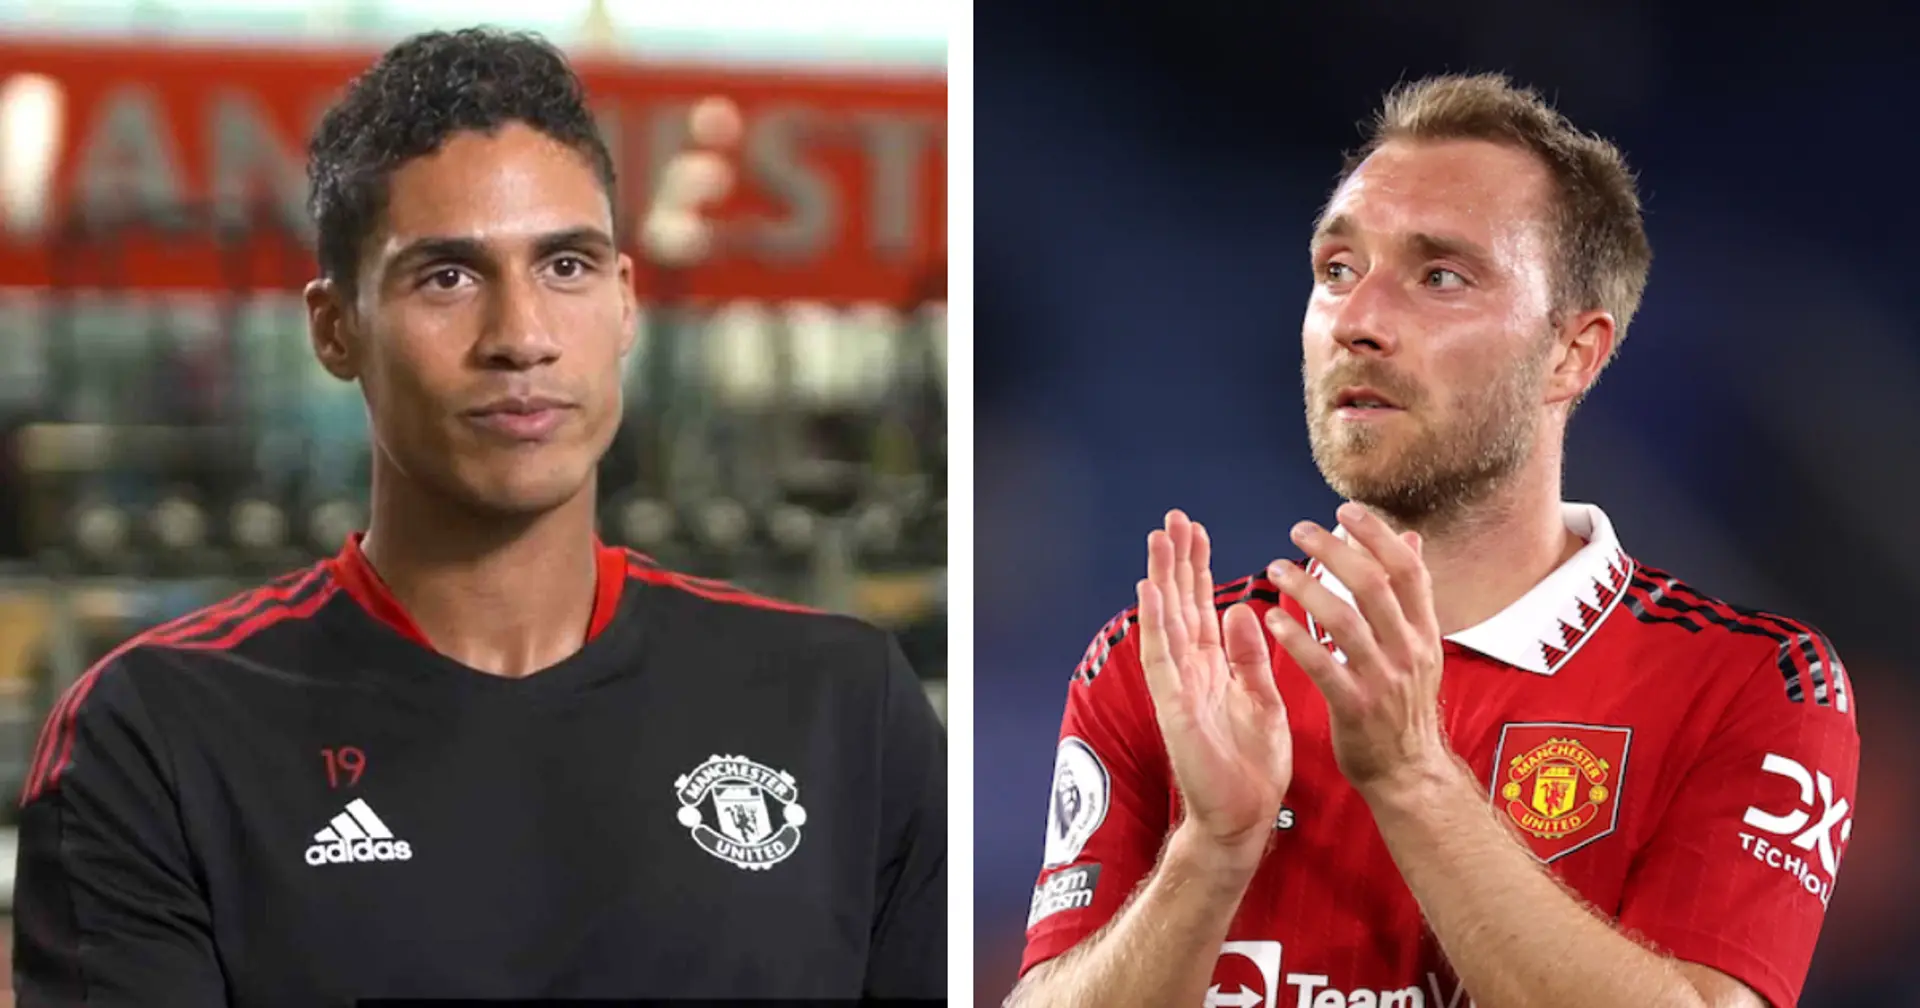 'He managed to integrate quickly': Varane delivers verdict on Eriksen's start at United